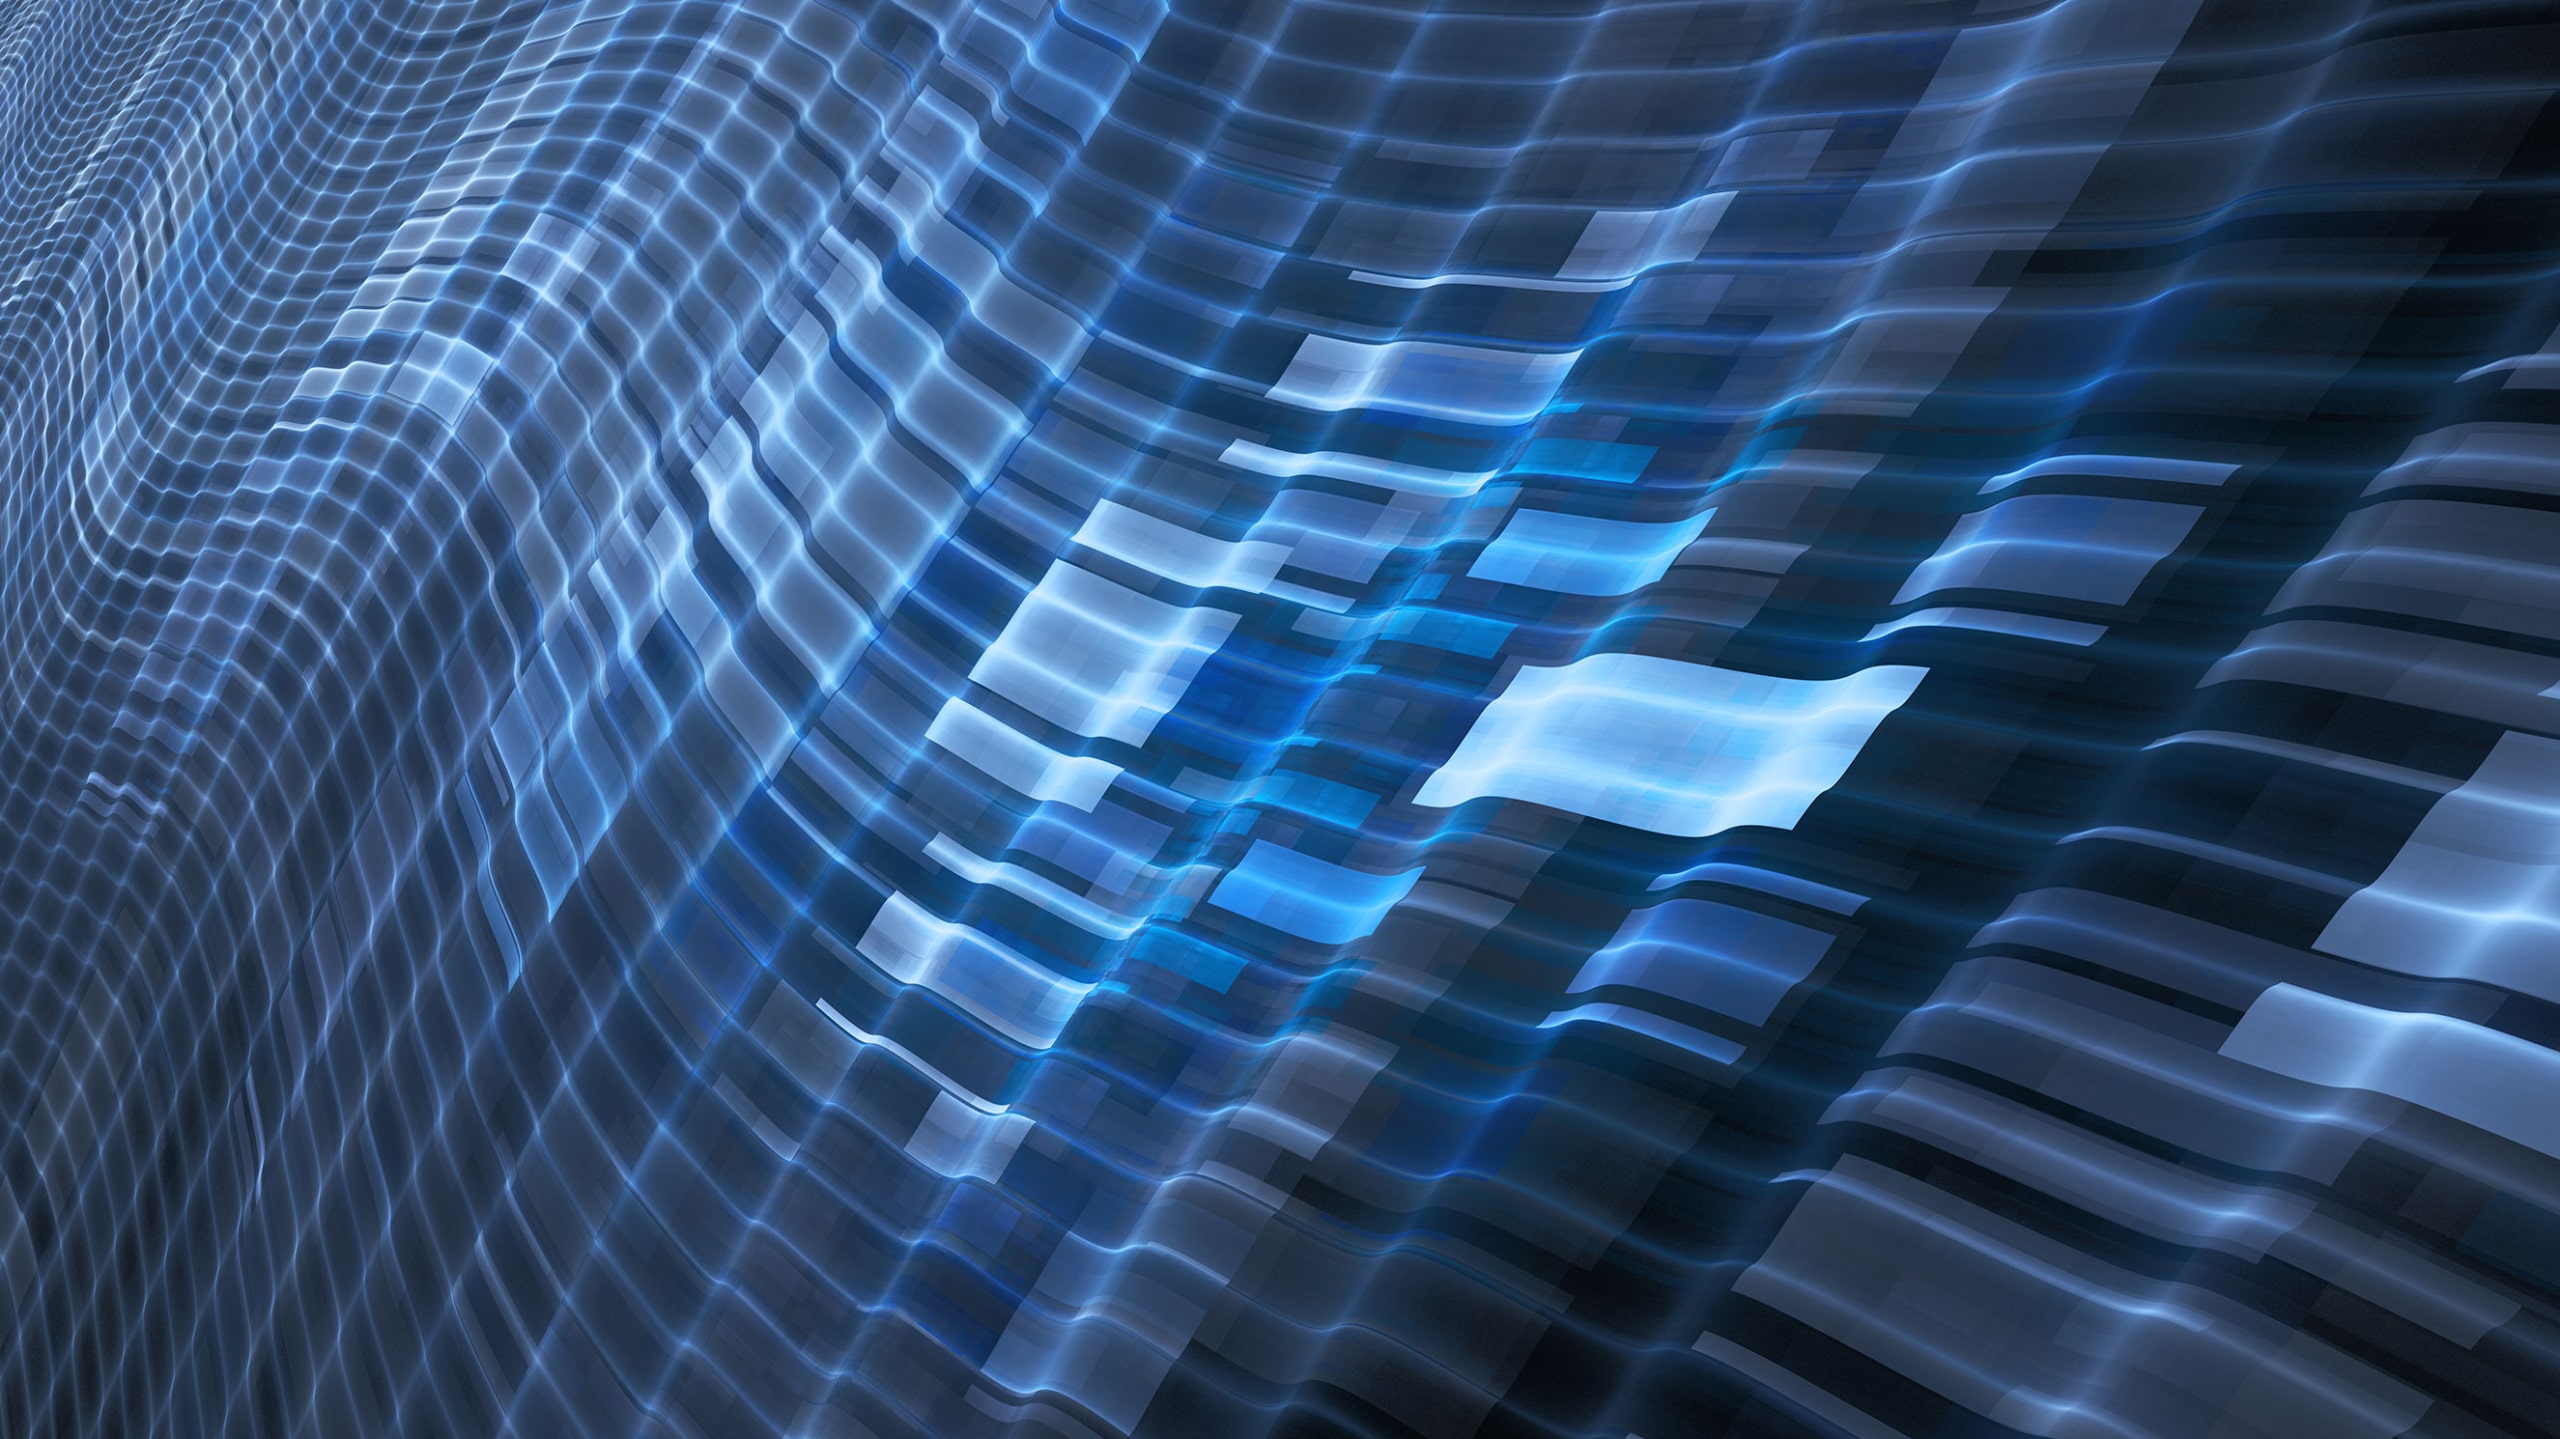 Abstract digital image featuring a small cluster of dynamic wavy lines in shades of blue and black, creating a ripple effect across the surface.